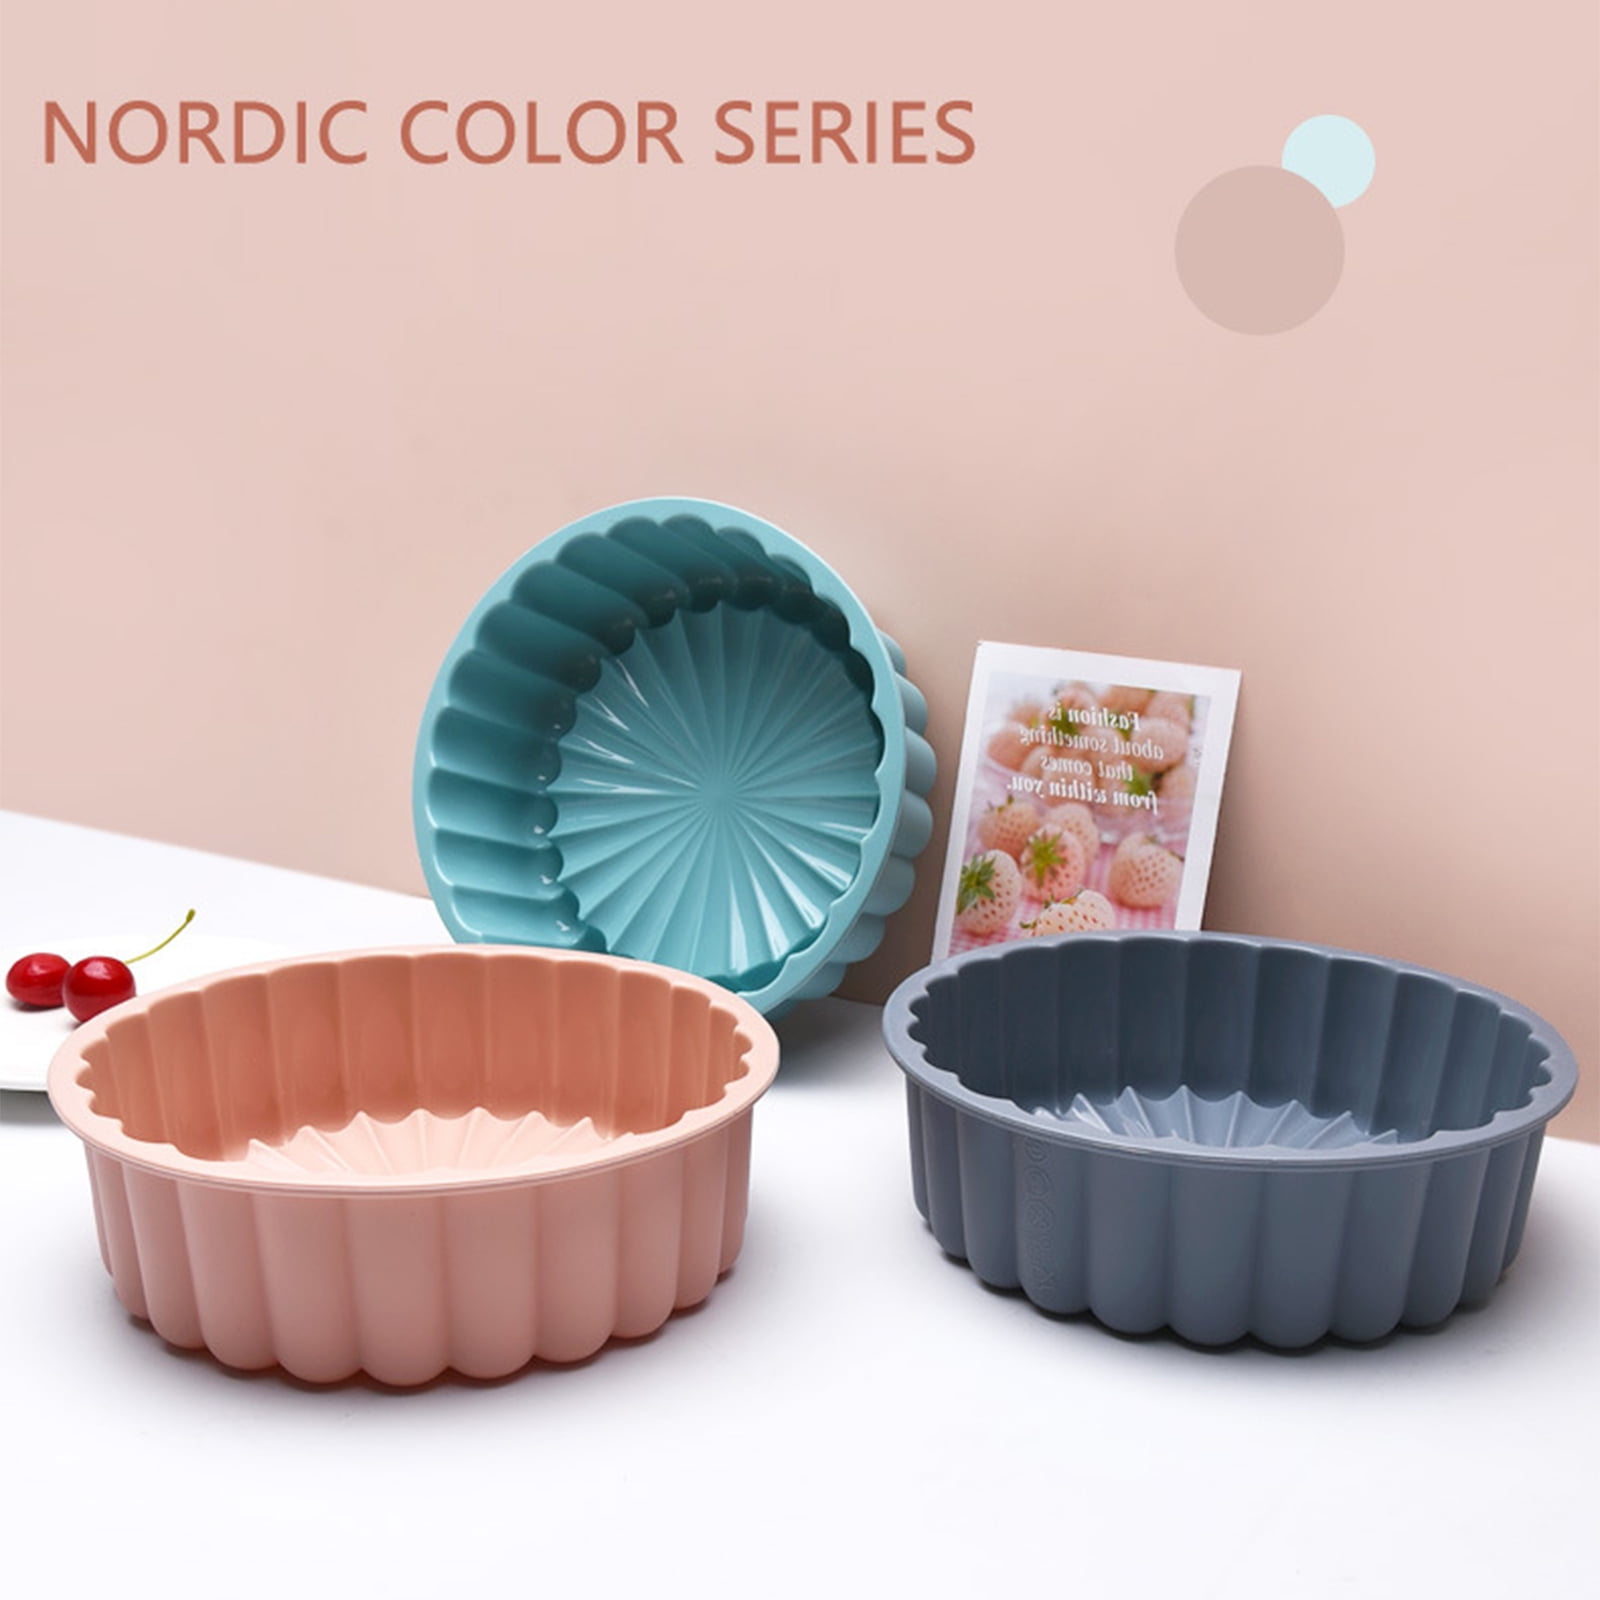 6 Grid Novelty Heart Silicone Cake Pan Strawberry Shortcake Baking Pan Mary  Cakes Pan Sponge Flan Mold Kitchen Accessories